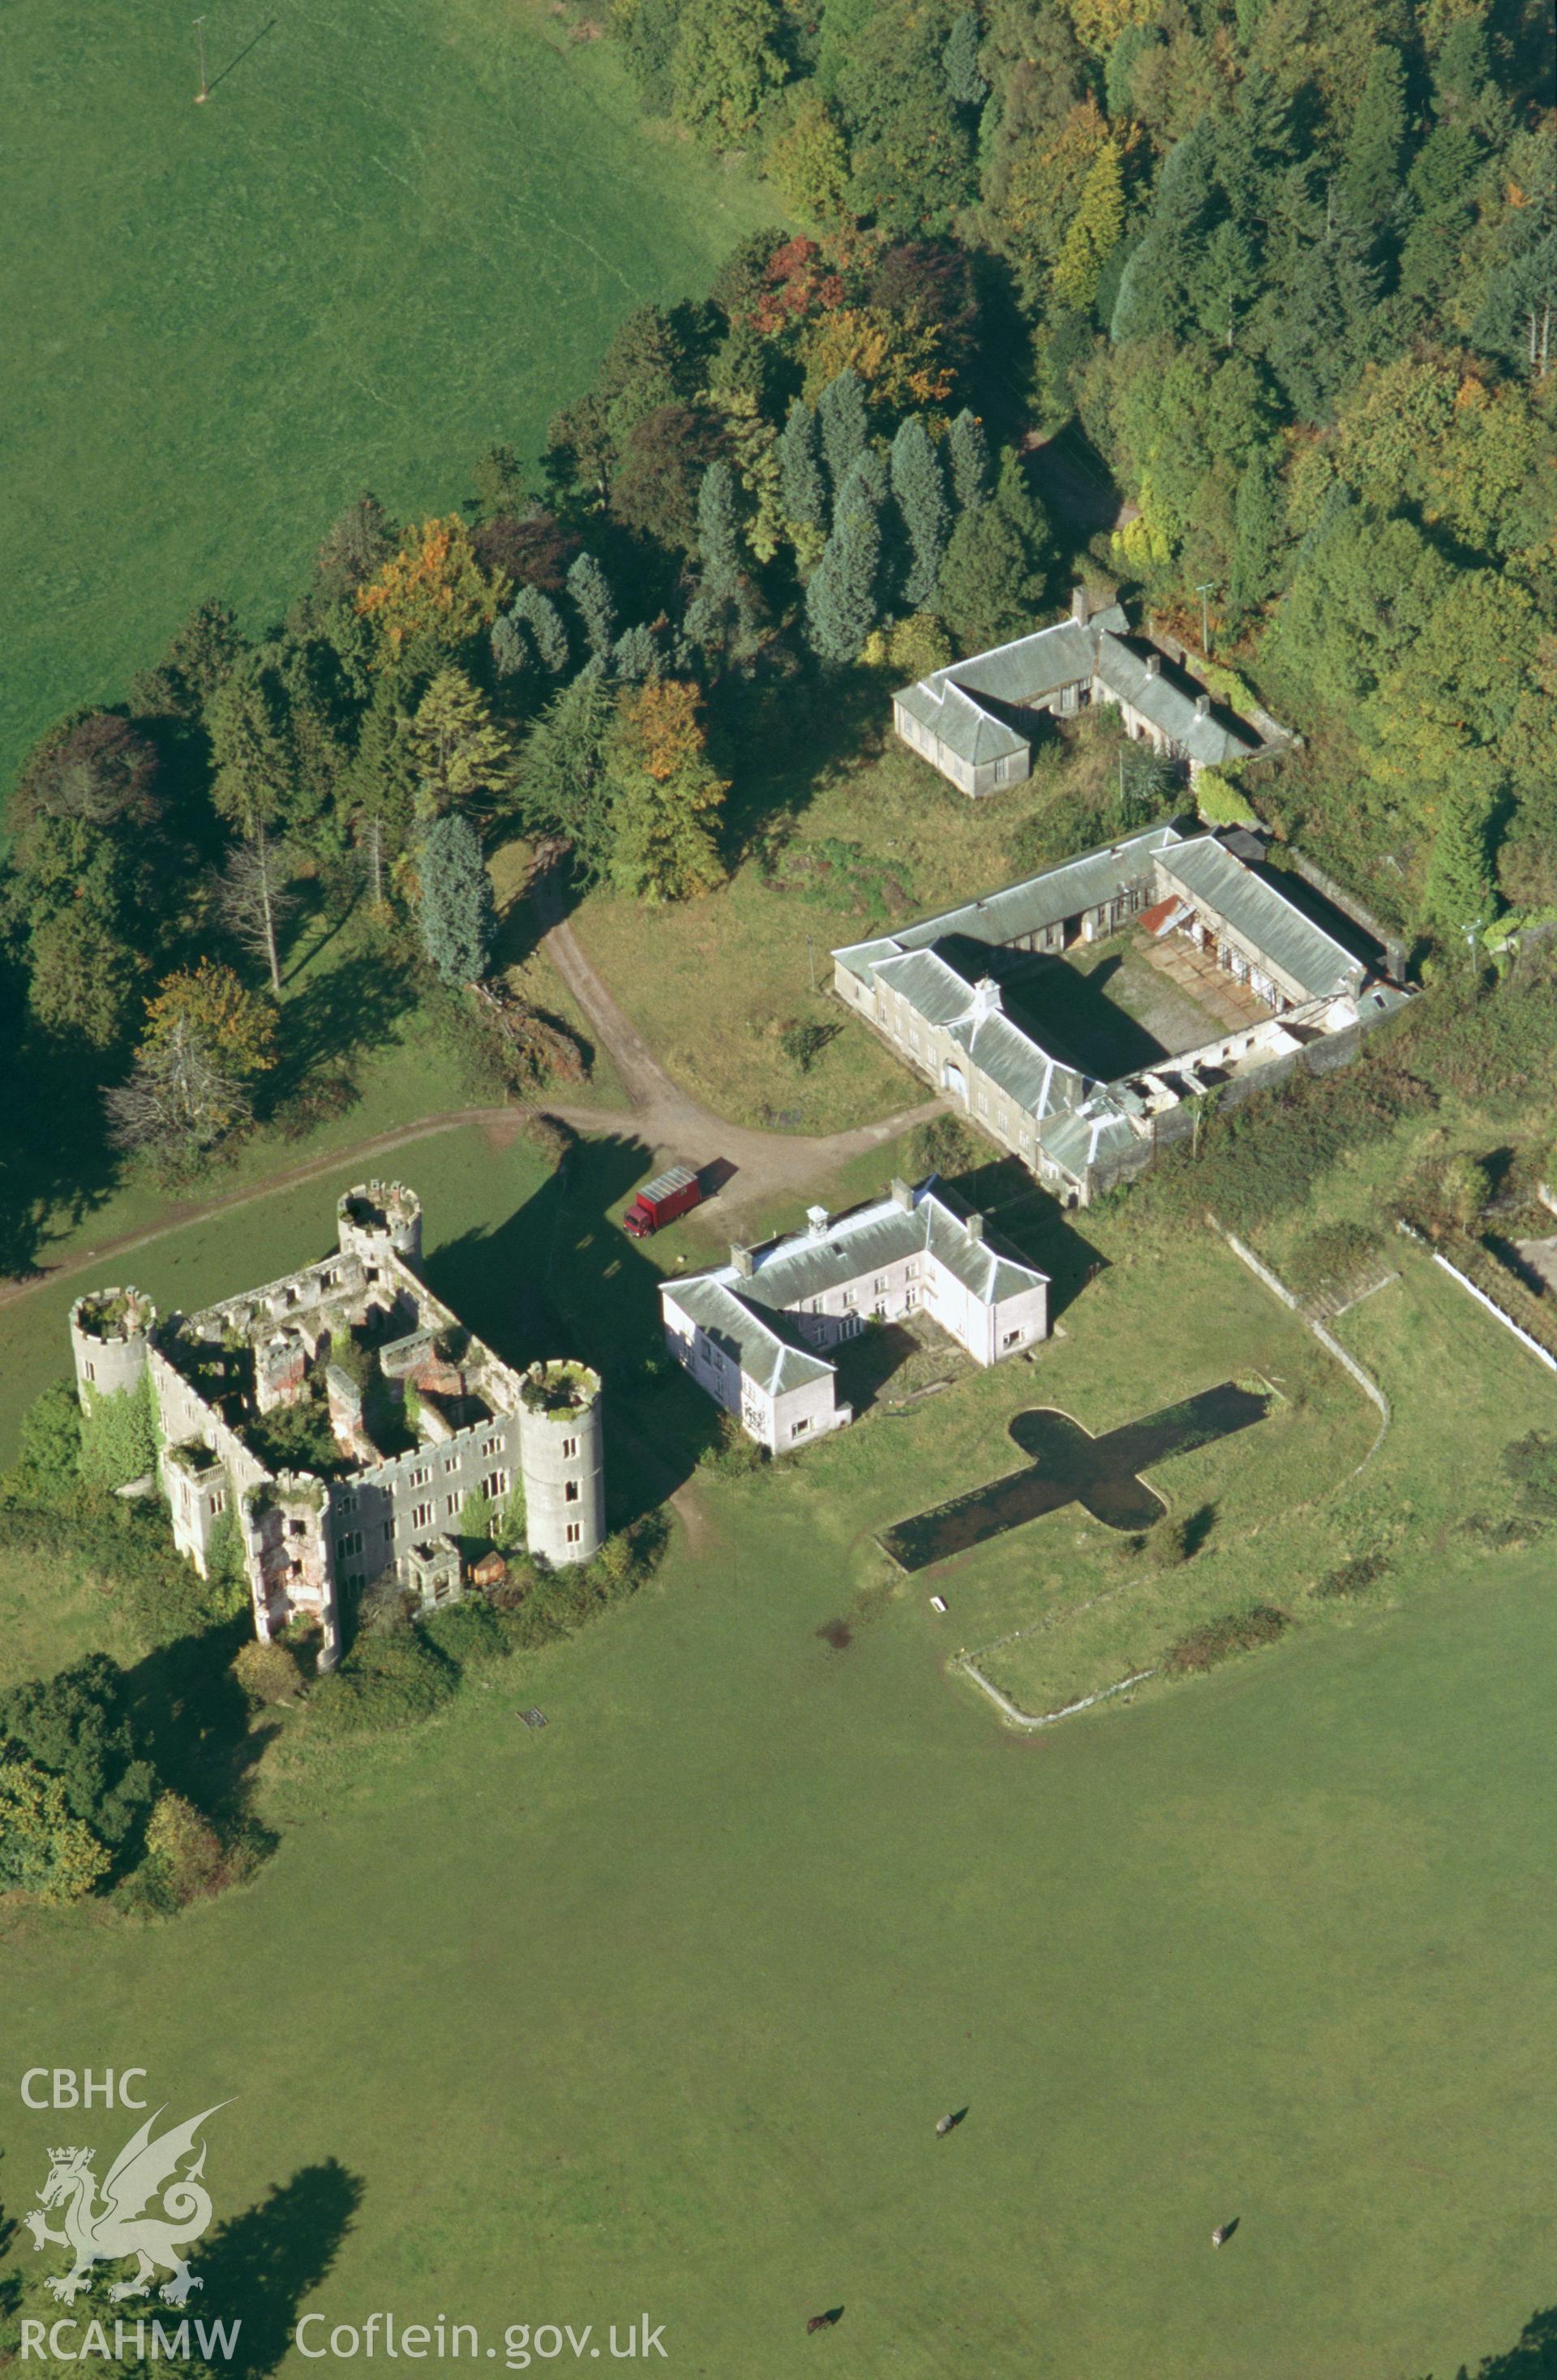 RCAHMW colour slide oblique aerial photograph of Ruperra Castle, taken on 13/10/1999 by Toby Driver